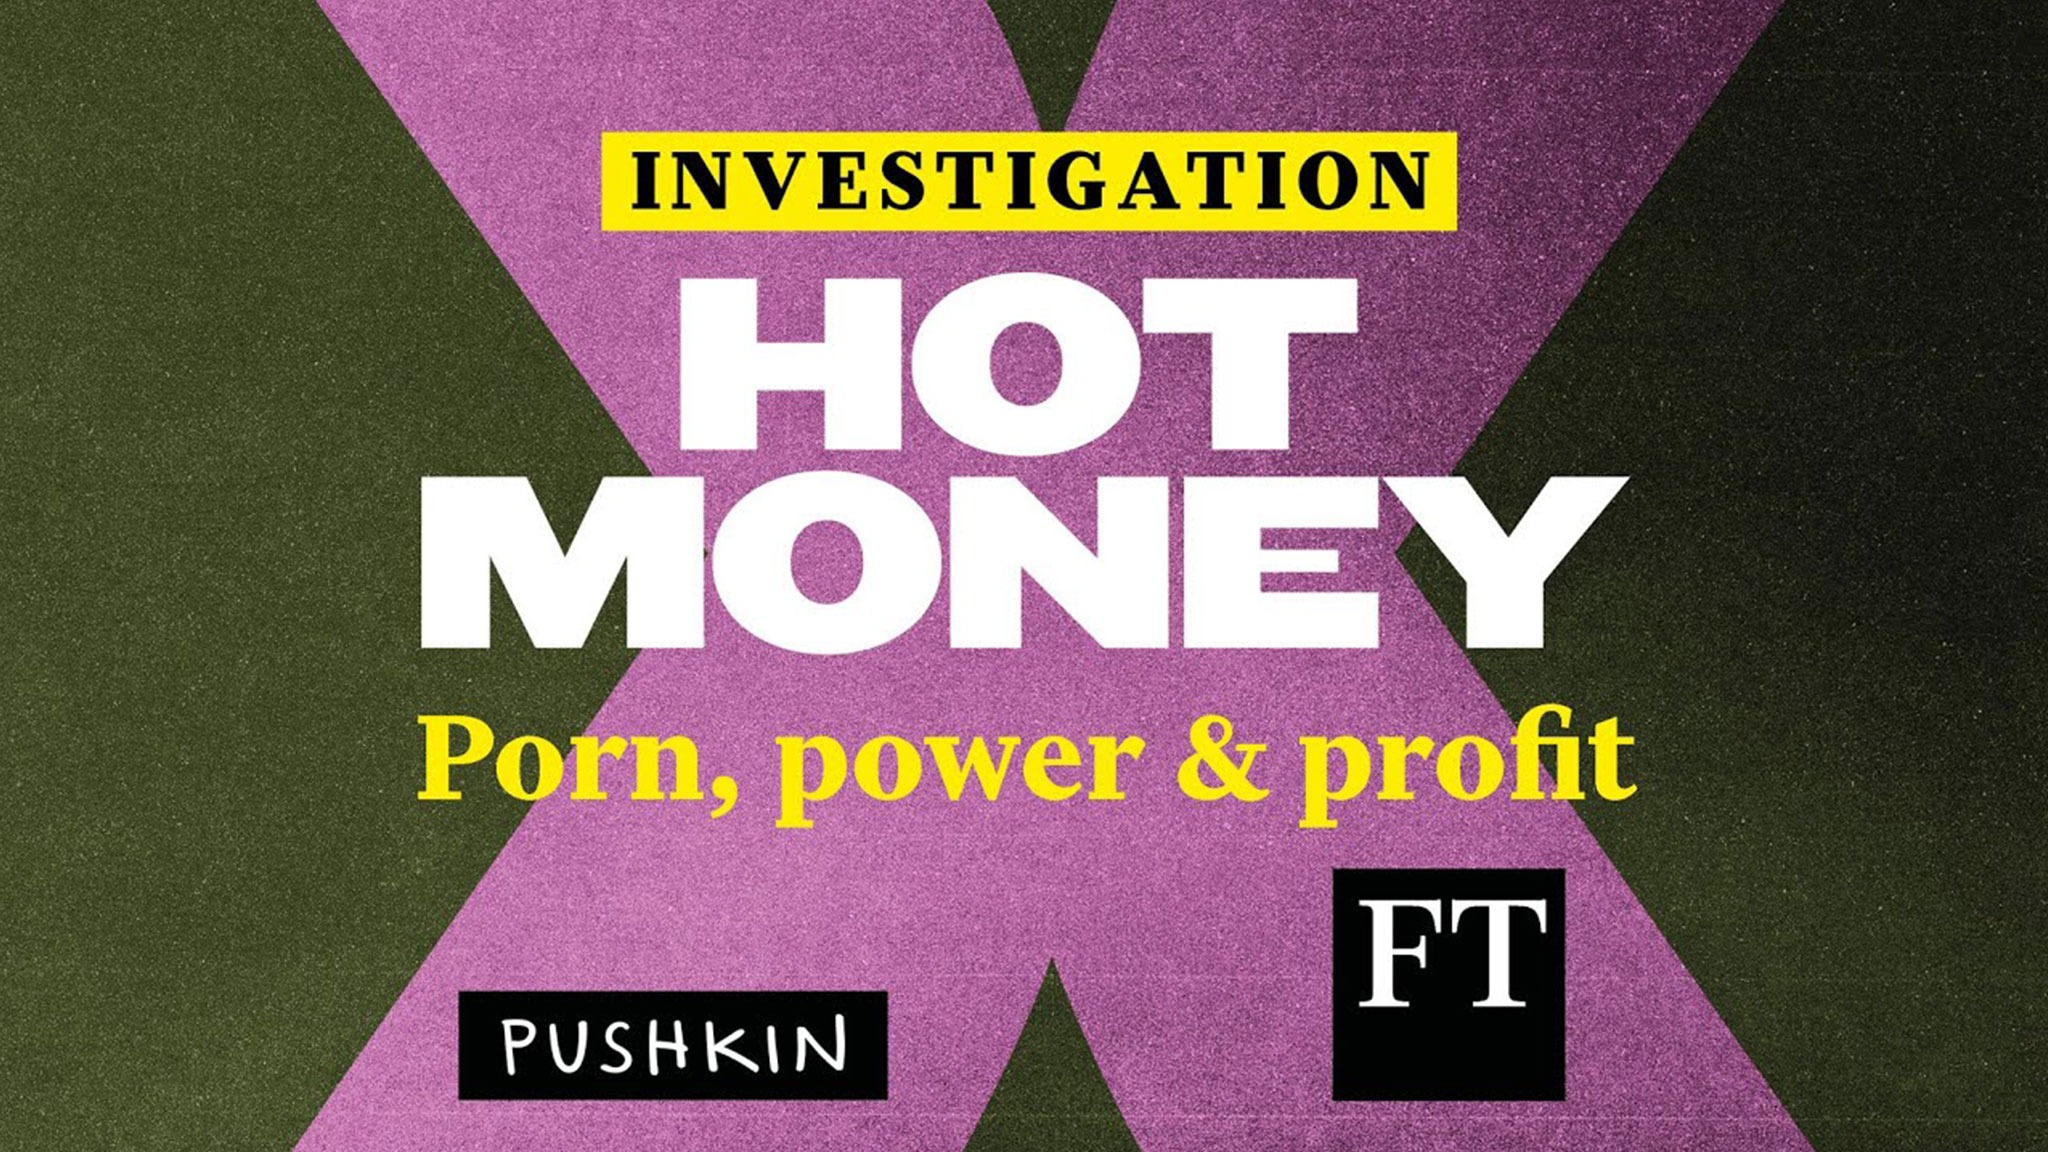 Porn meets the internet Financial Times photo